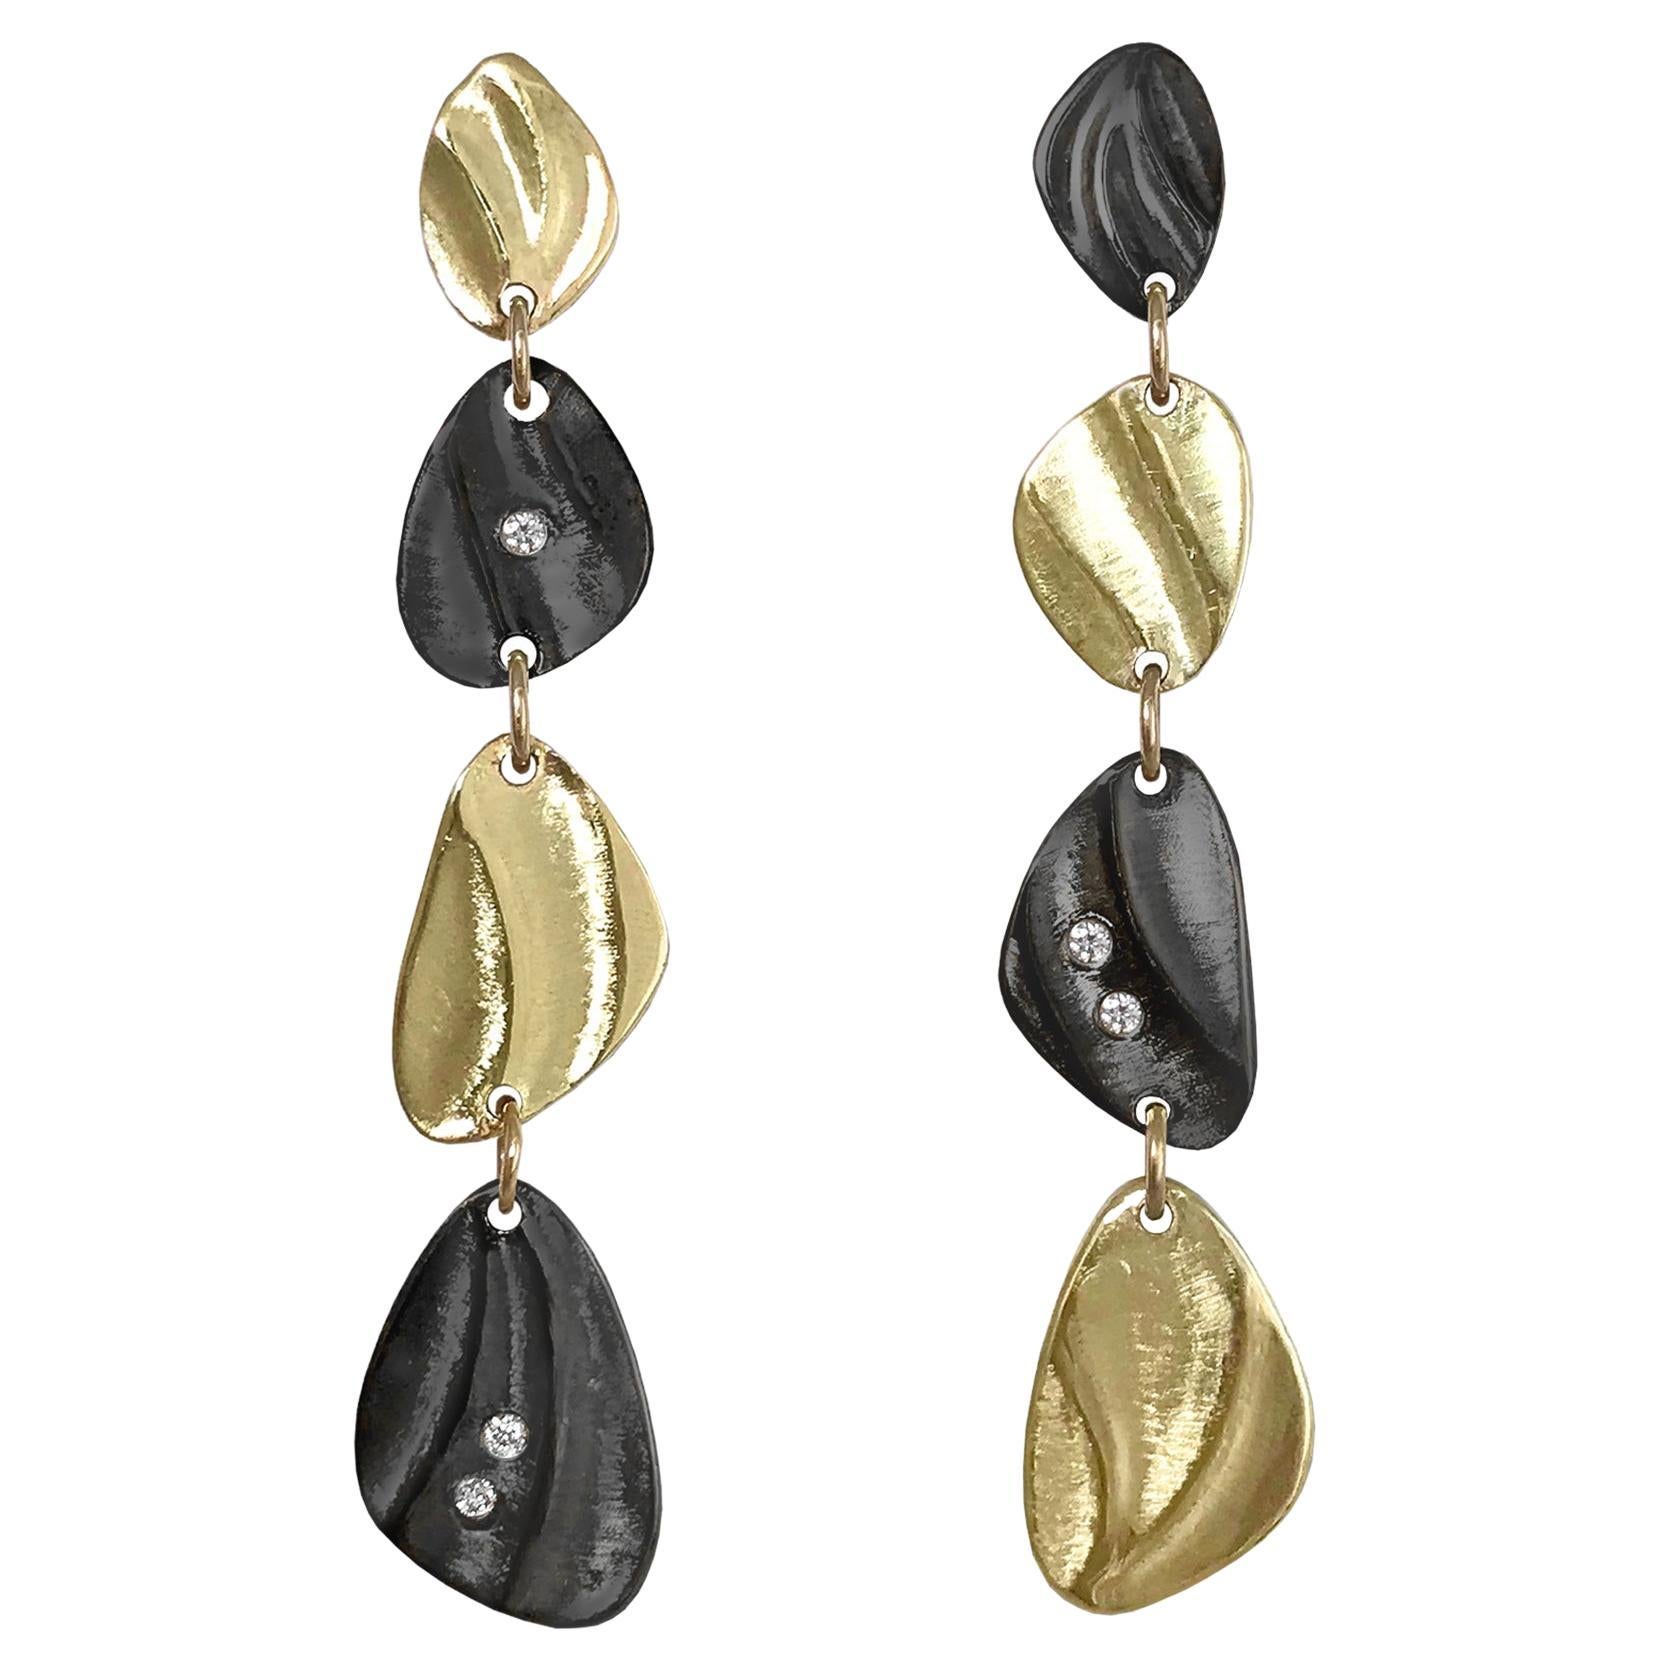 14 Karat Gold and Silver Pebble Dangle Earrings with Diamonds from K.Mita